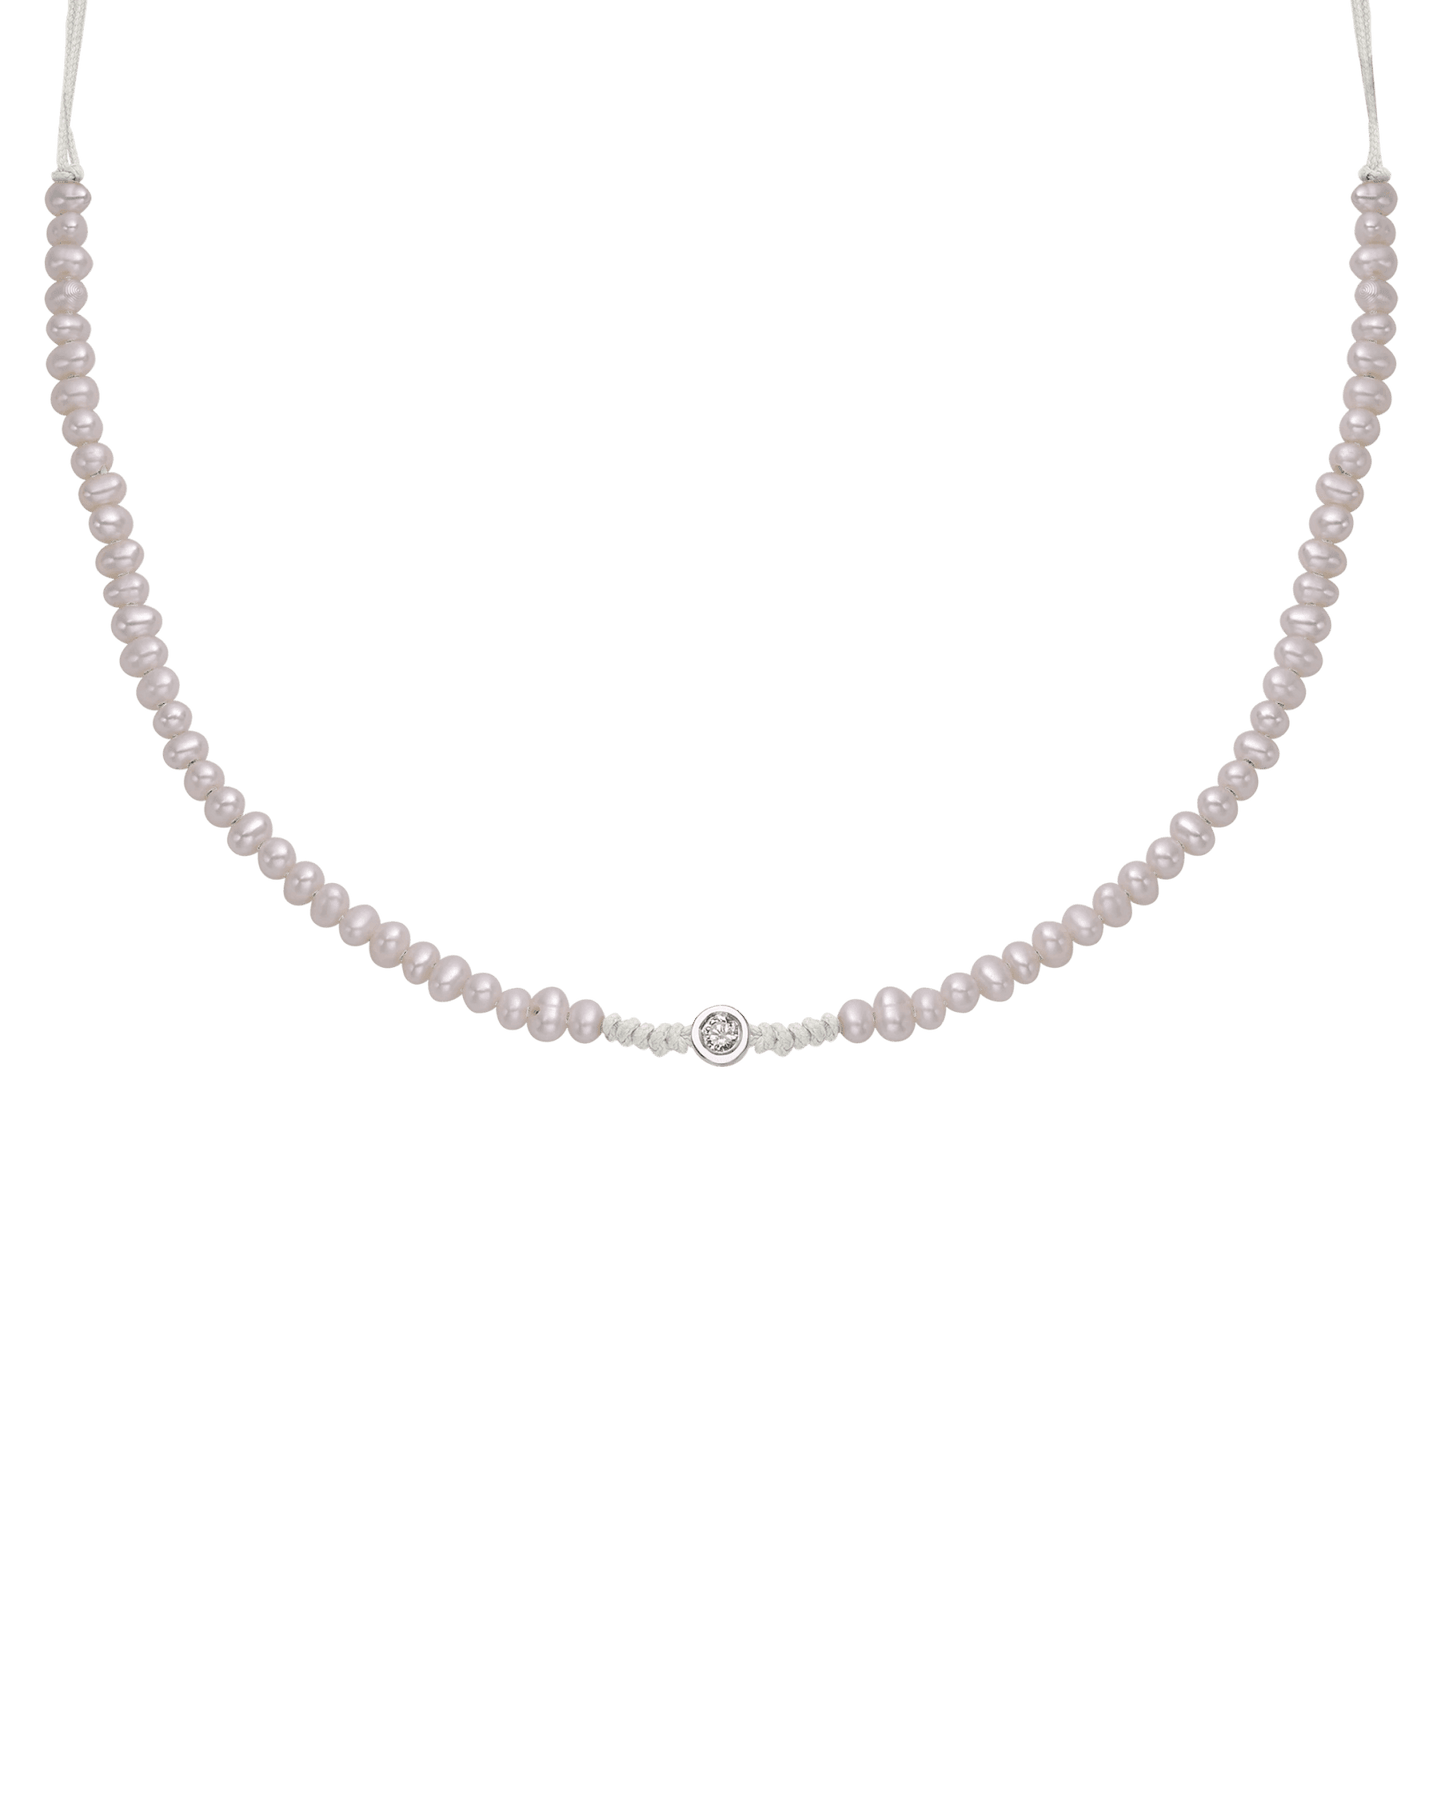 Collier String of Love Perles Naturelles - Or Blanc 14 carats Necklaces 14K Solid Gold Perle Medium: 0.05 carats 